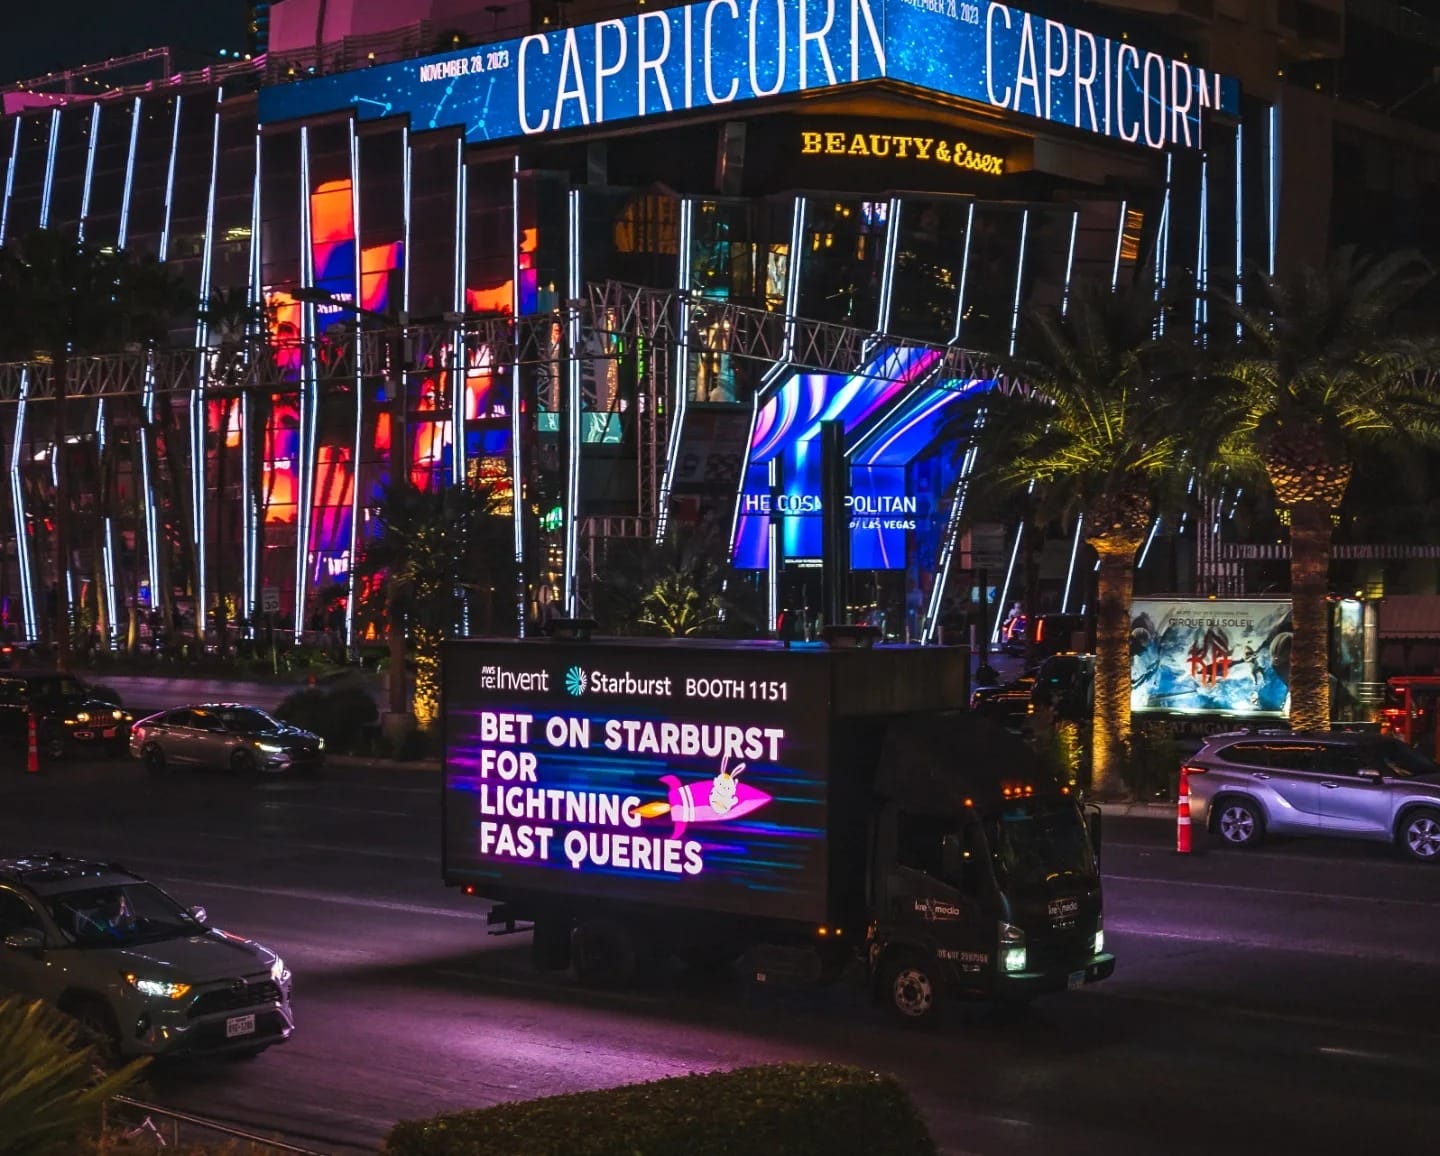 Neon-lit Vegas street view with mobile advertisement truck.